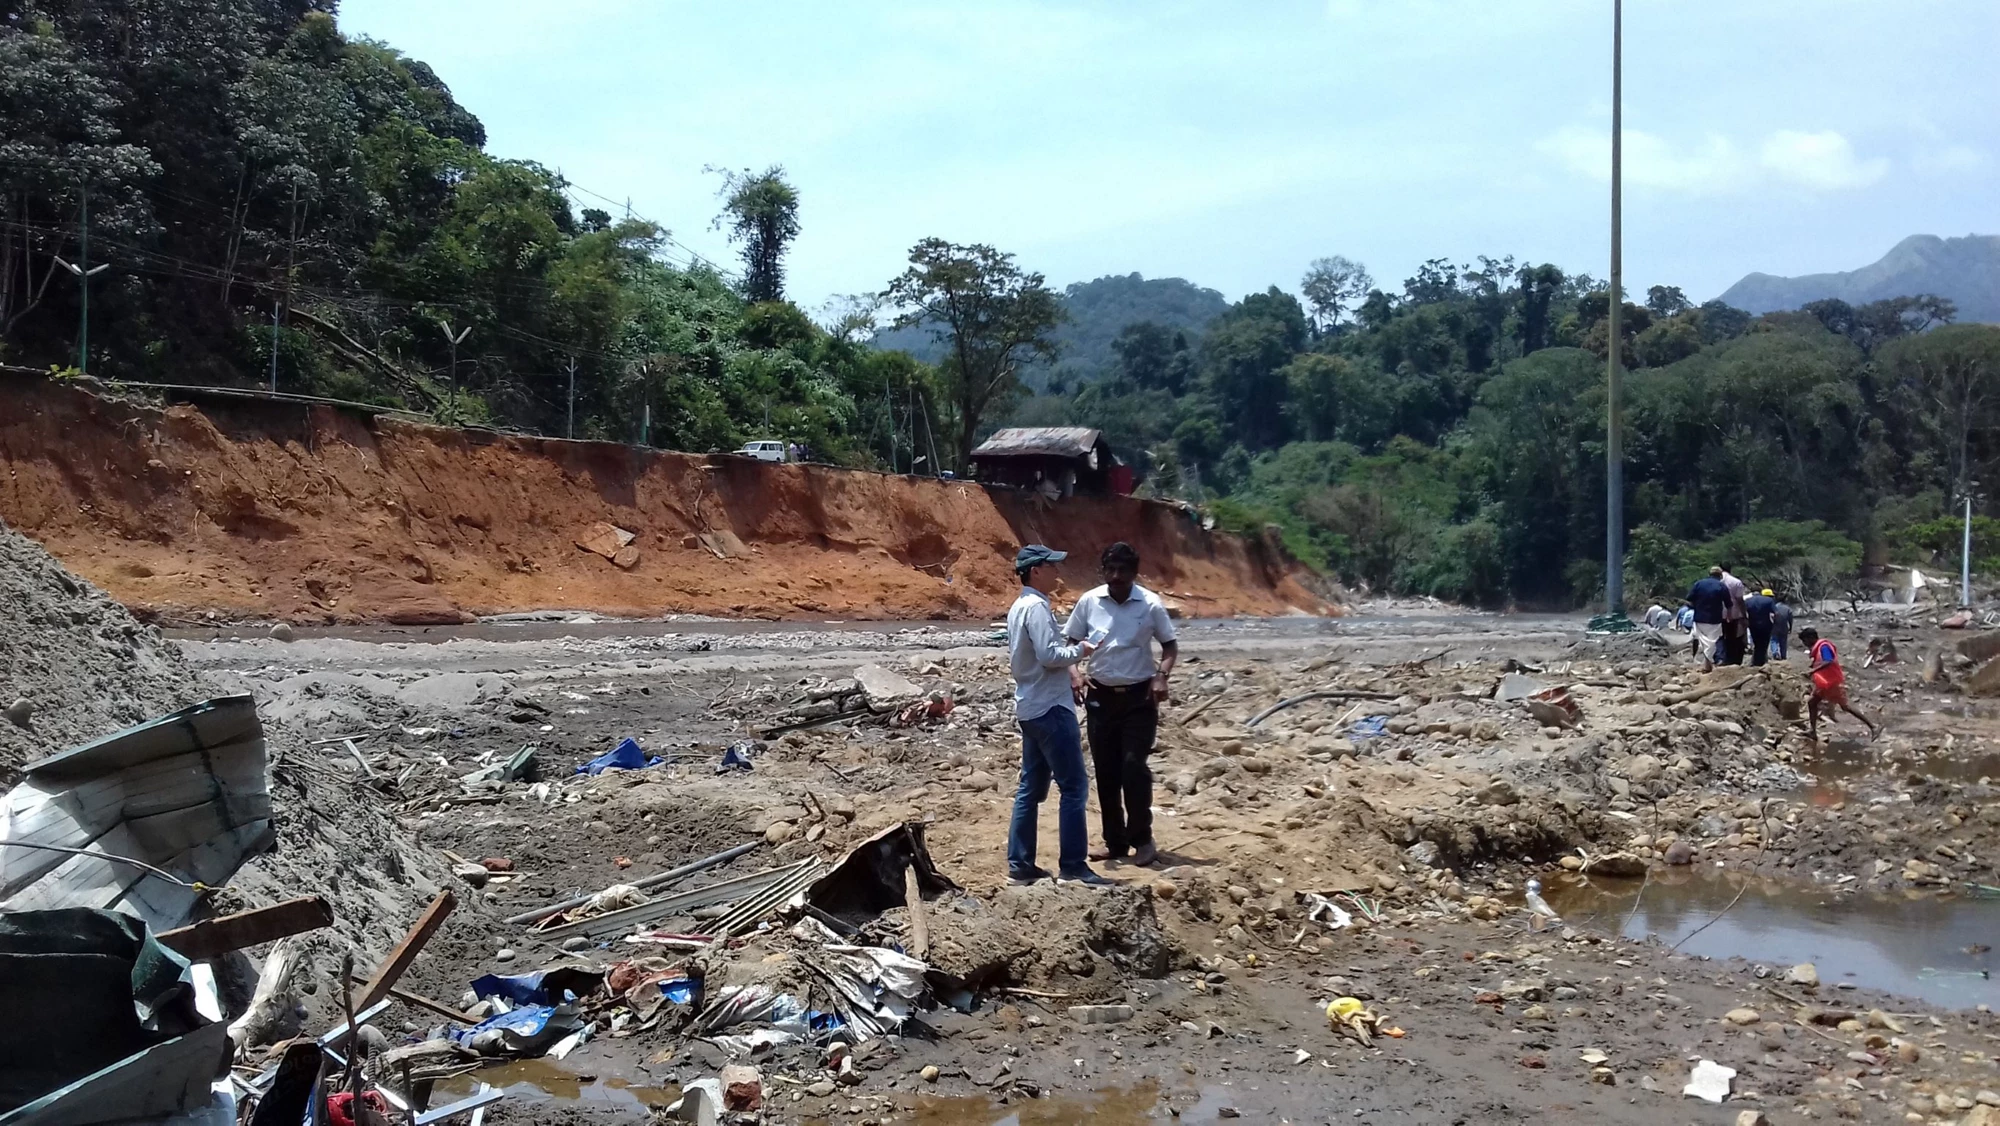 Damaged roads and infrastructure in the Pamba Region of Kerala following a series of deadly floods and landslides in August 2018